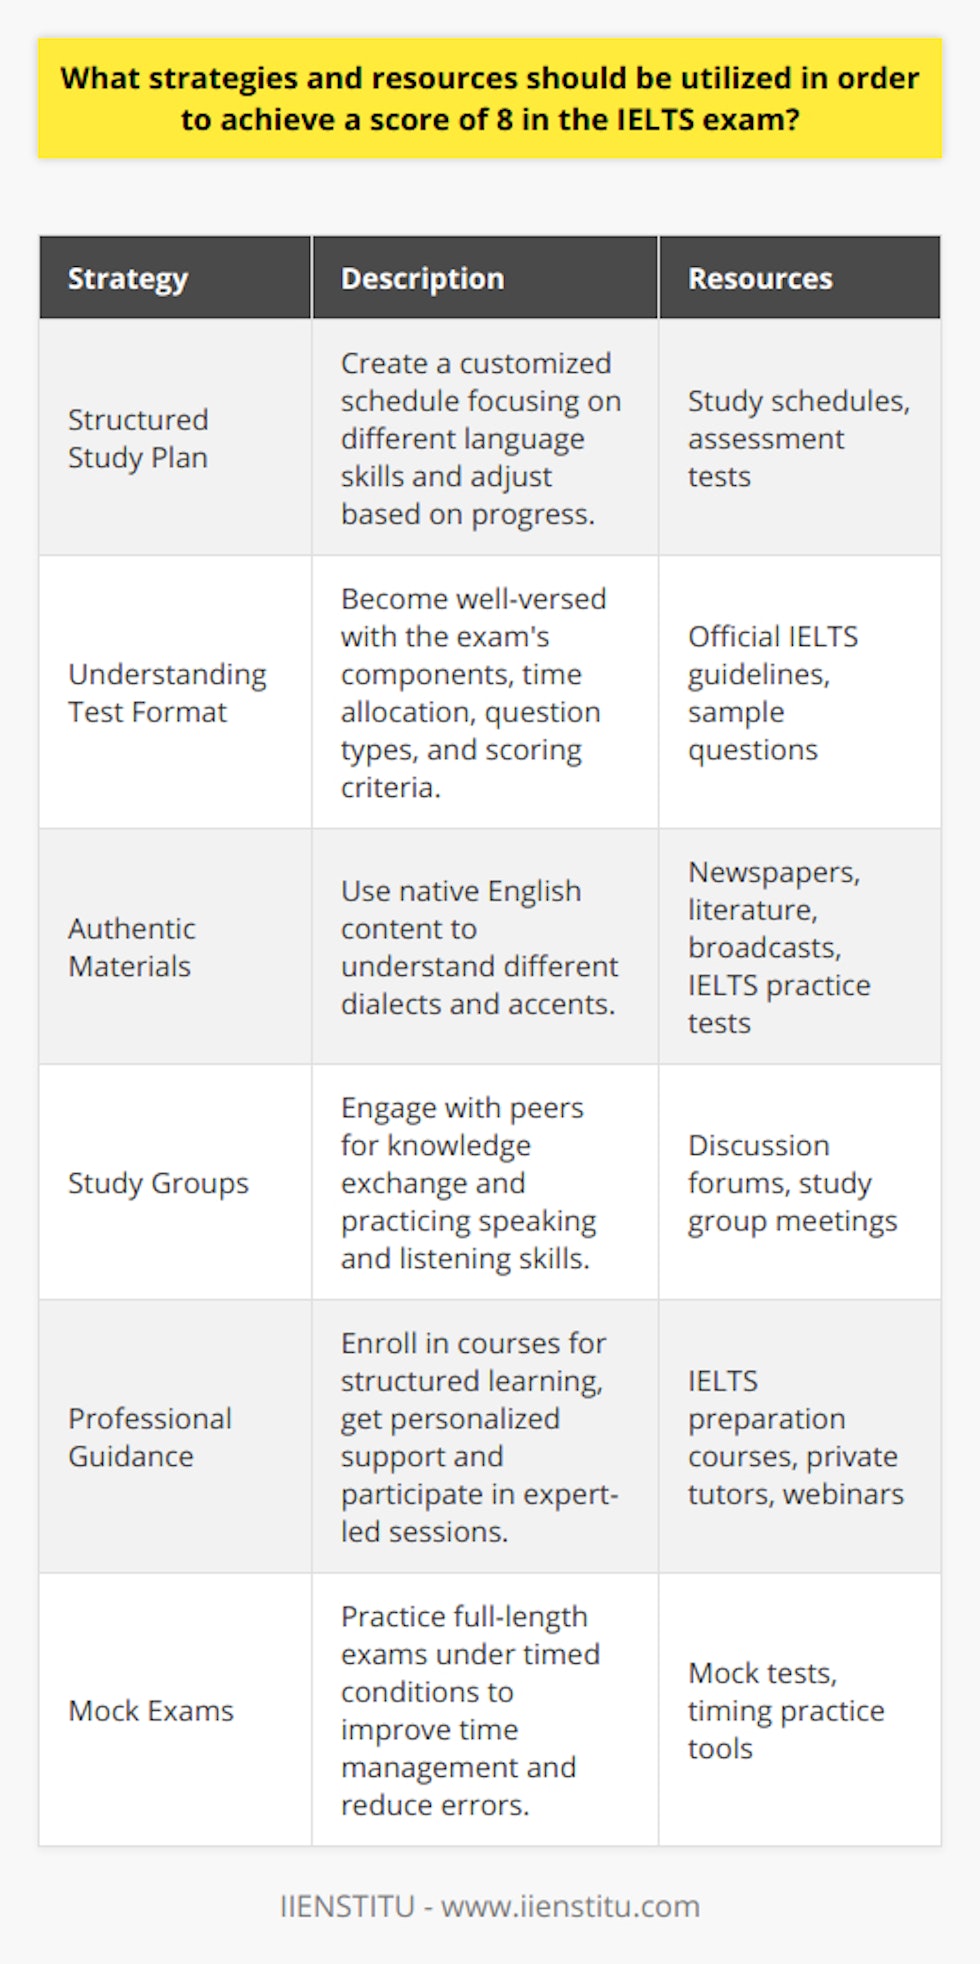 Achieving a score of 8 in the IELTS exam can be daunting for many aspirants. However, with the right strategies and resources, it's entirely feasible. Here are some effective approaches to prepare for the IELTS and propel one towards achieving their desired score:**Structured Study Plan**- Create a detailed study schedule, dedicating time each day to focus on different language skills.- Identify your strengths and areas for improvement by conducting an initial assessment.- Adjust the study plan regularly based on your ongoing progress and self-evaluation.**Understanding the Test Format**- Familiarize yourself with the four components of the IELTS: Listening, Reading, Writing, and Speaking.- Learn about question types you will encounter, the time duration for each section, and the scoring system.- Understand the criteria that examiners use to grade your performance.**Utilizing Authentic Materials**- Engage with native English content, like newspapers, literature, and broadcasts, to broaden your understanding of various dialects and accents.- Leverage free and paid IELTS preparation resources, including full-length practice tests and sample questions.- Use mobile applications and online practice tools designed to help improve your language proficiency.**Joining Study Groups**- Collaborate with fellow IELTS candidates to share knowledge, resources, and test-taking techniques.- Engage in discussions and debates to enhance your speaking and listening skills.- Provide and receive constructive feedback on writing and speaking responses.**Seeking Professional Guidance**- Consider a preparation course offered by trusted providers such as IIENSTITU, which can give structured learning and expert feedback.- Engage with tutors who can provide personalized support and address specific difficulties you might have.- Participate in workshops and webinars to gather insights and tips from IELTS instructors and high scorers.**Taking Mock Exams**- Simulate actual test conditions by timing yourself and taking full-length mock exams.- Regularly practice under timed conditions to build endurance and time management skills.- Review your mock exam results to understand errors and apply strategies to avoid them in the future.By implementing these strategies and consistently using quality resources, aspirants can not only aim for but potentially achieve a score of 8 in their IELTS exam. Success in IELTS depends largely on dedication, structured preparation, and a strategic approach to mastering the skills assessed by the exam.